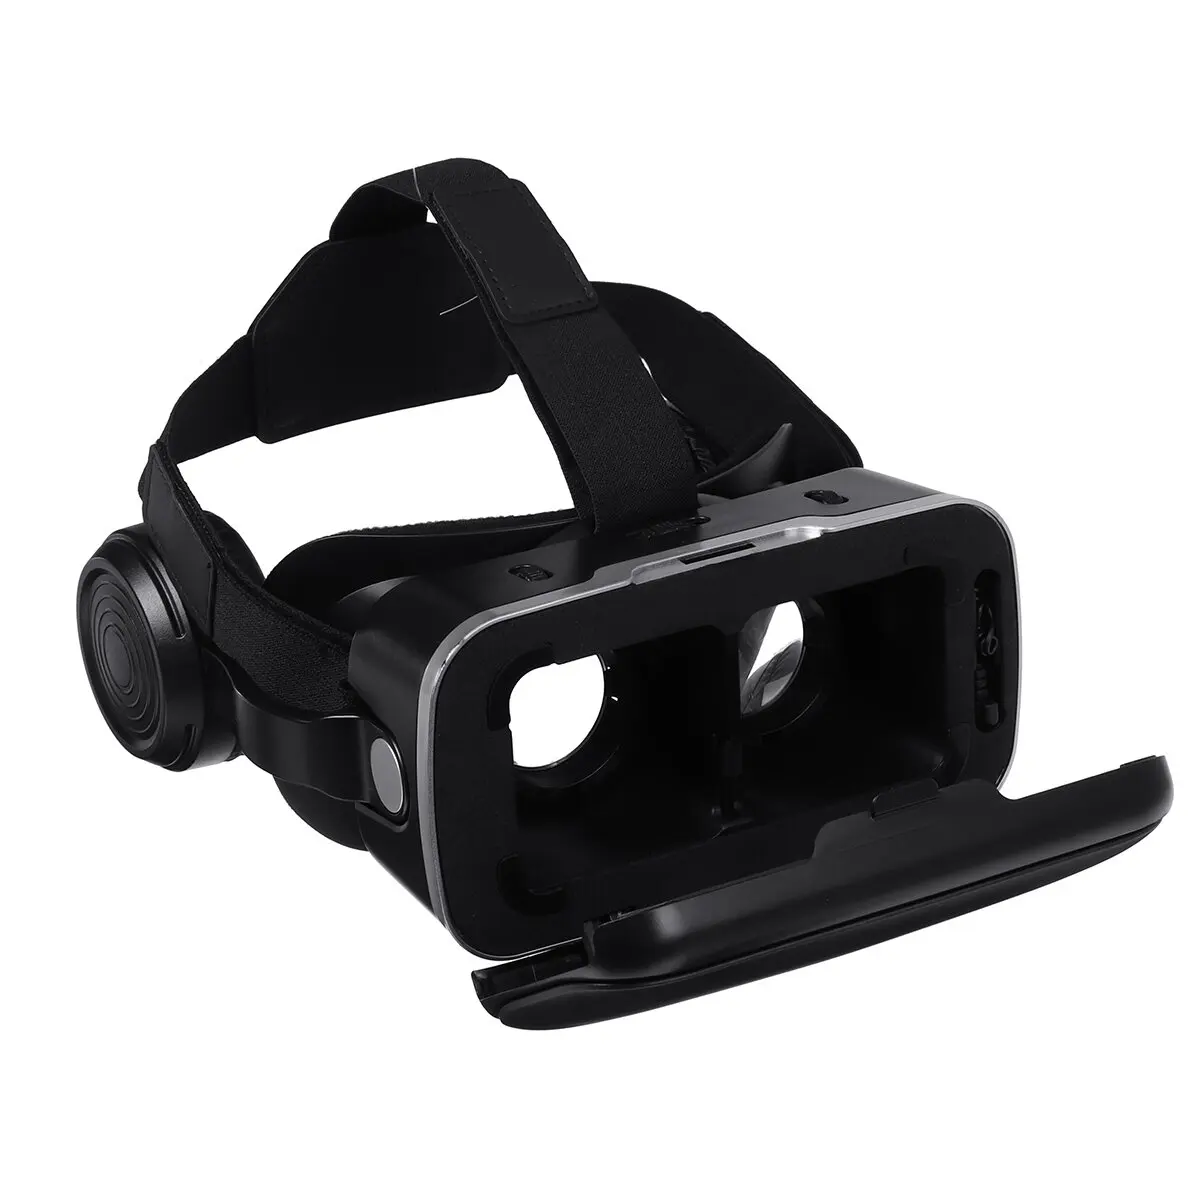 

3D VR Headset VR Bass Headphone Virtual Reality Artifact Glasses for Smartphones